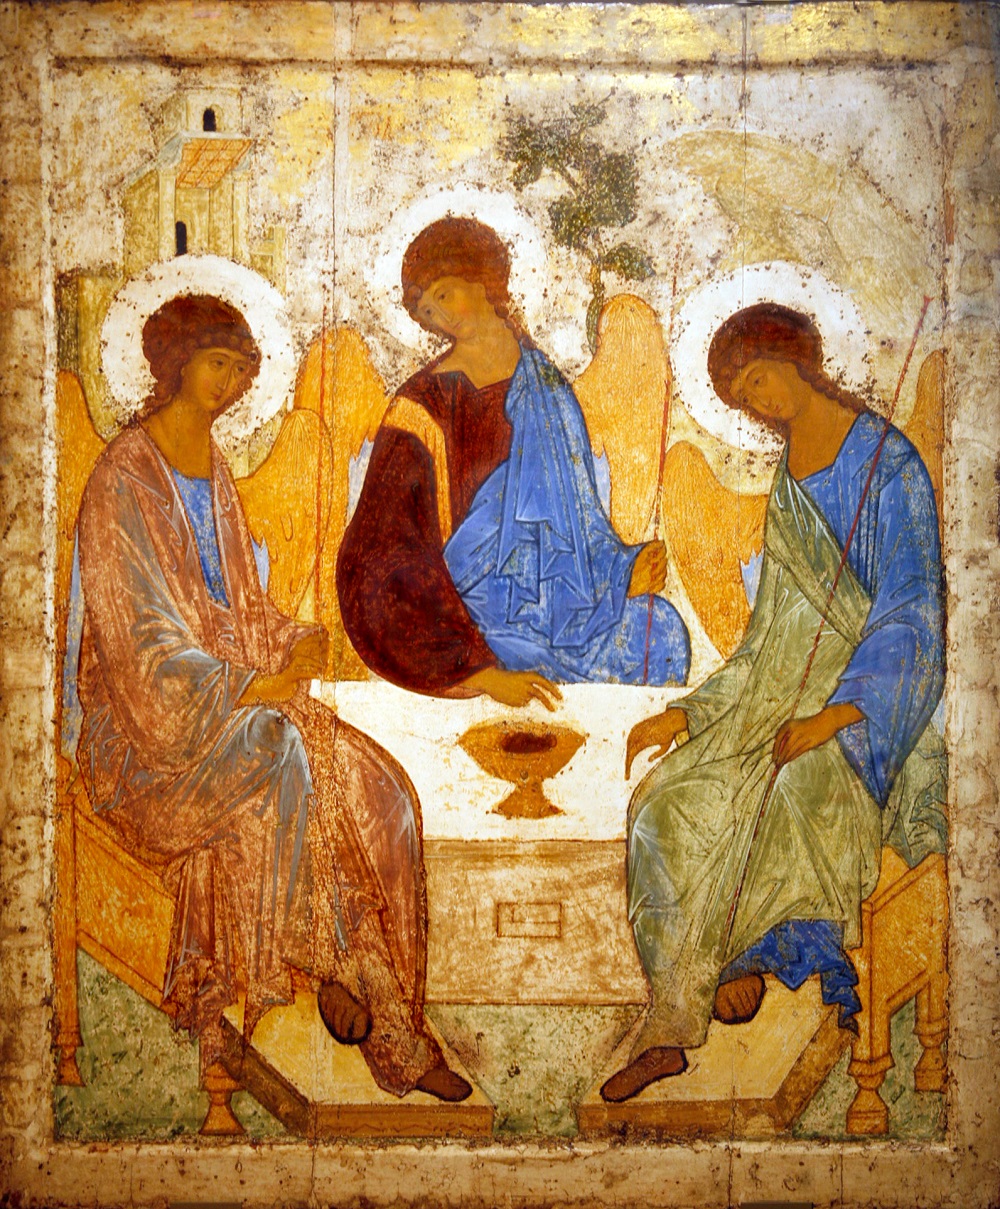 But his fame rests mostly on his restoration work. Were it not for him, we would probably have lost Andrei Rublev's legendary "Trinity" icon. 